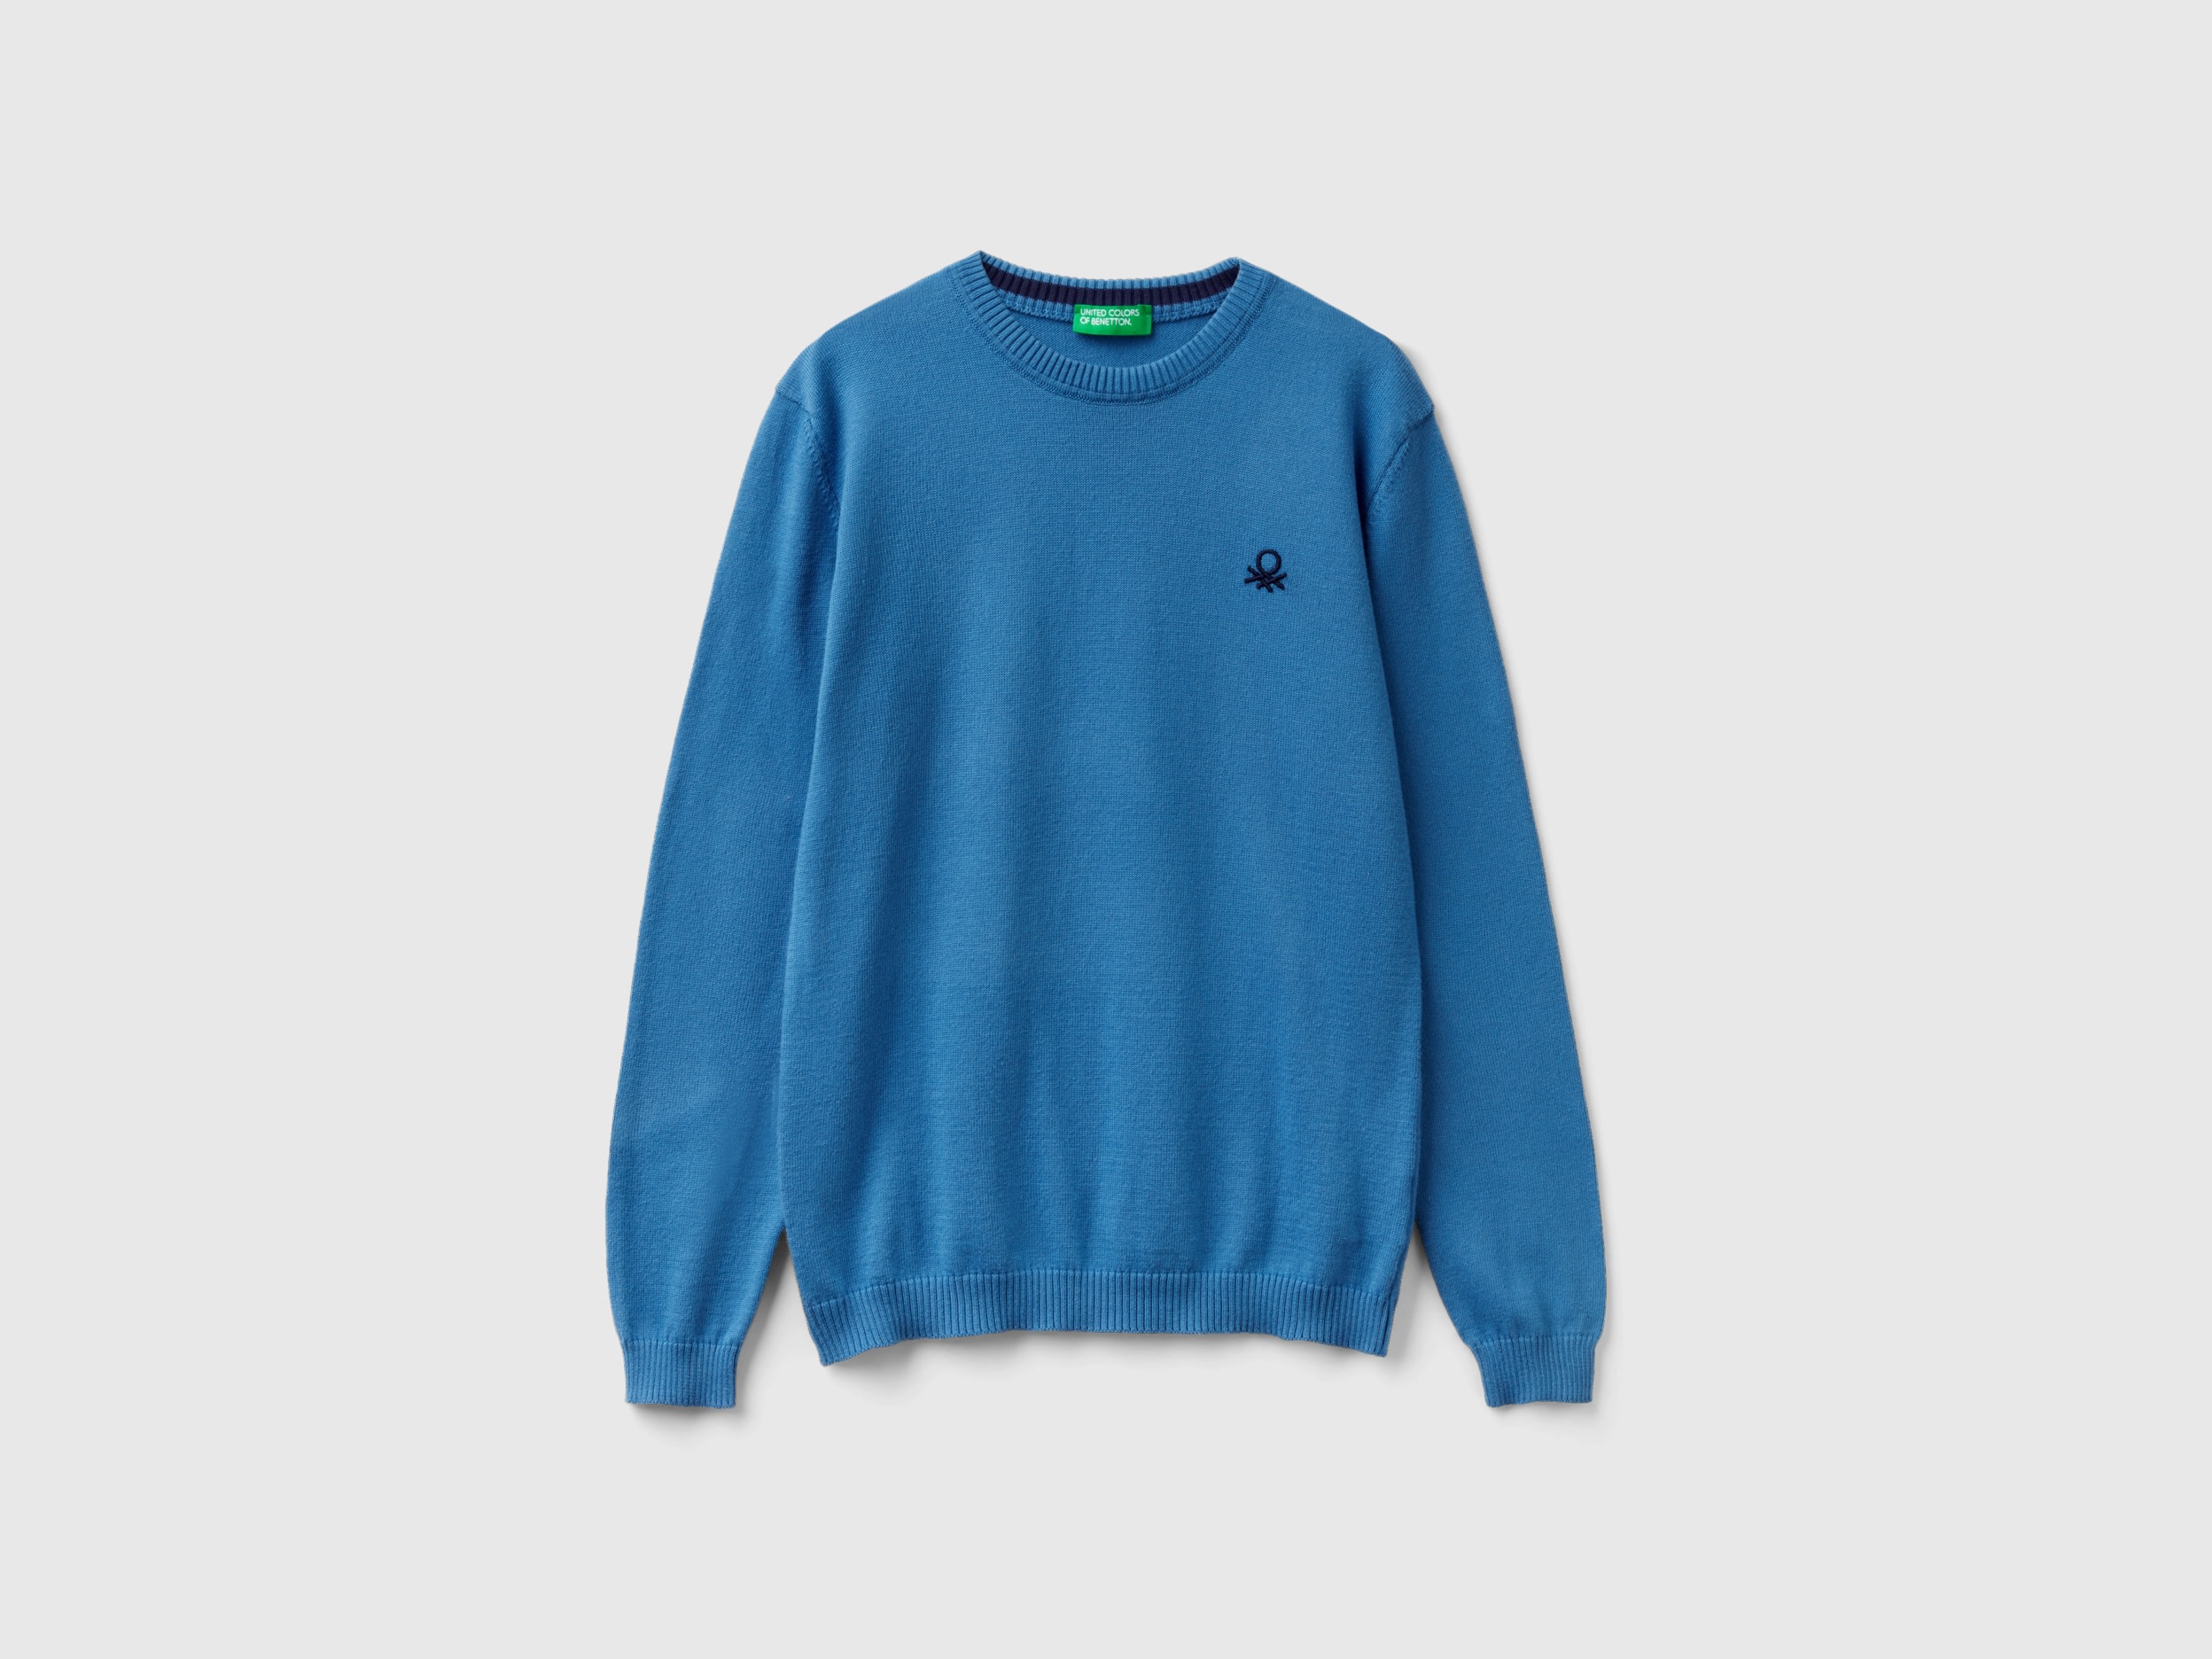 Benetton, Sweater In Pure Cotton With Logo, size 2XL, Blue, Kids